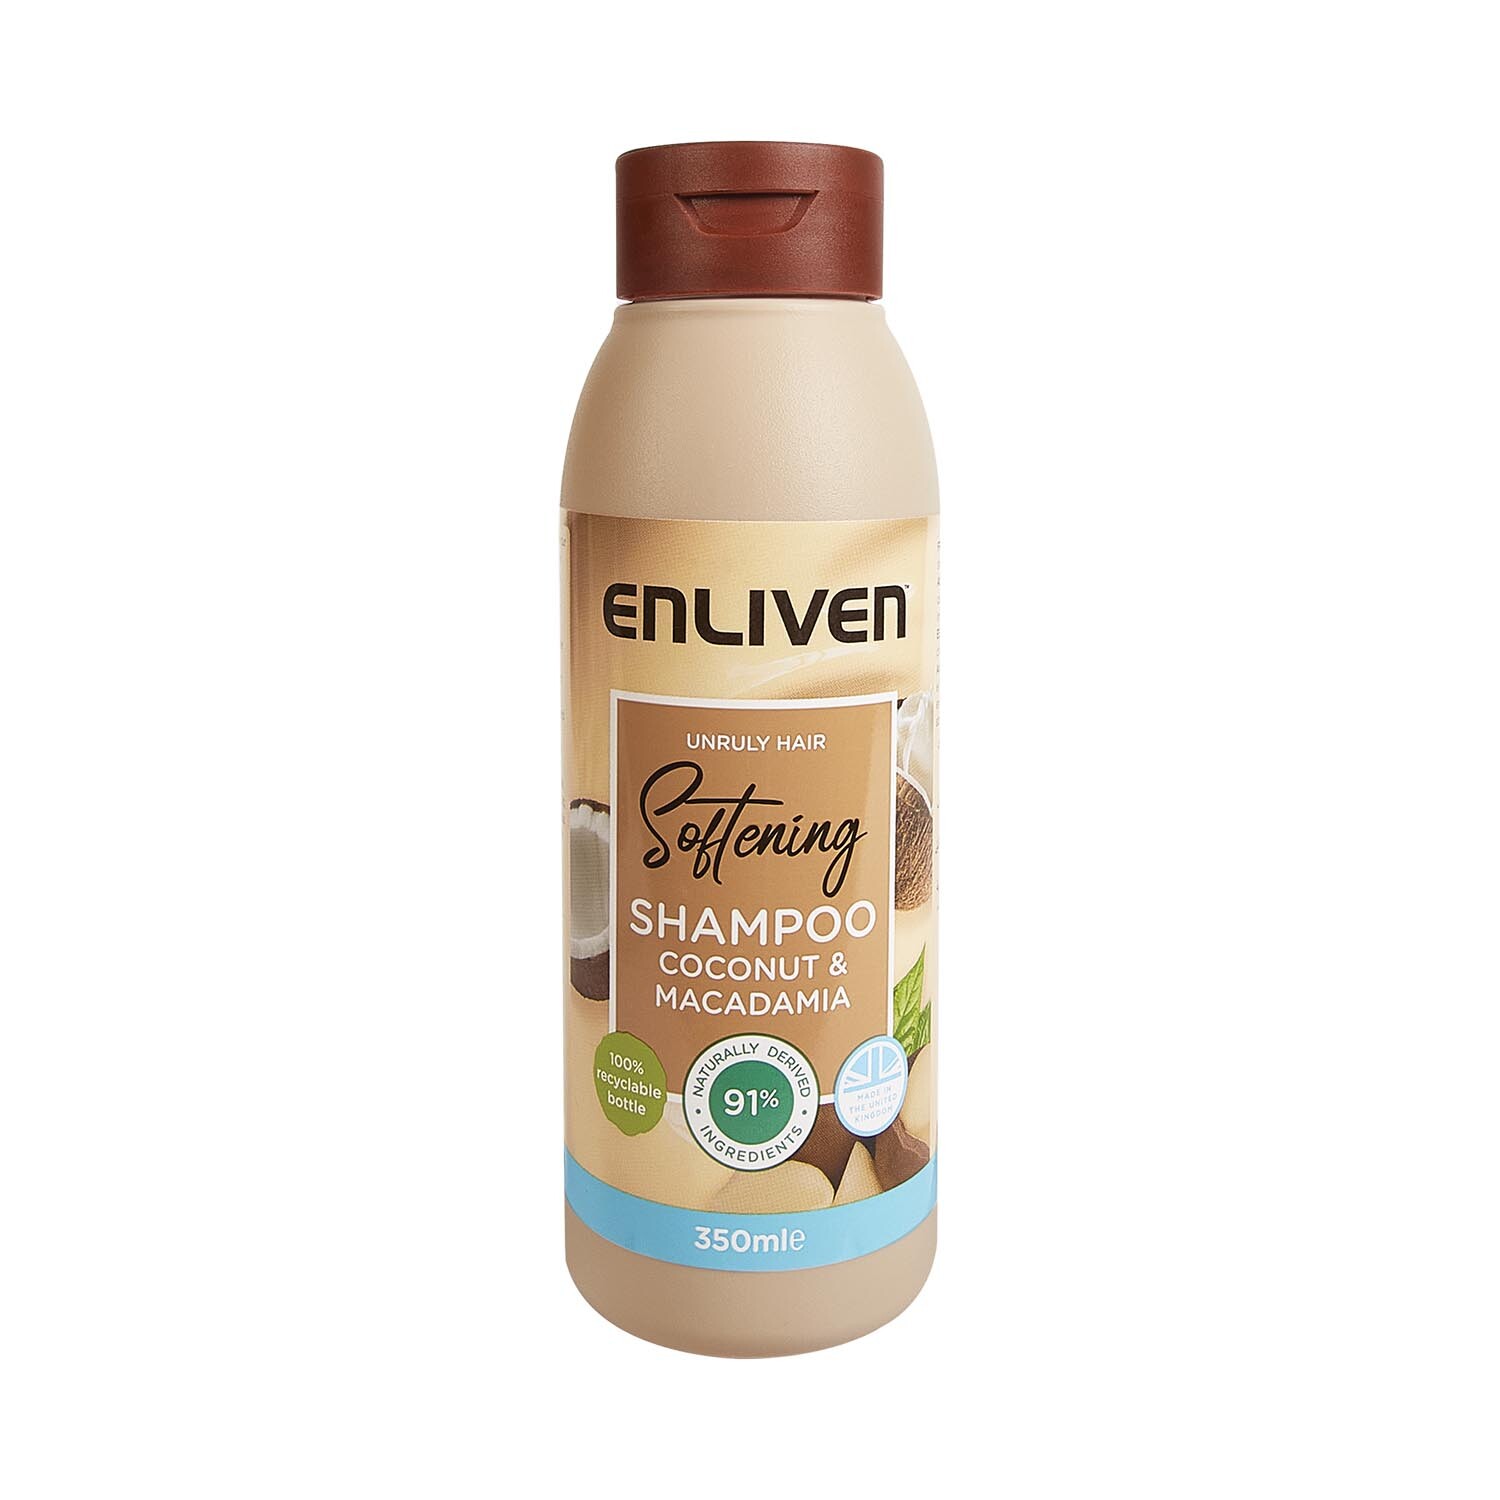 Enliven Softening Coconut and Macadamia Shampoo Image